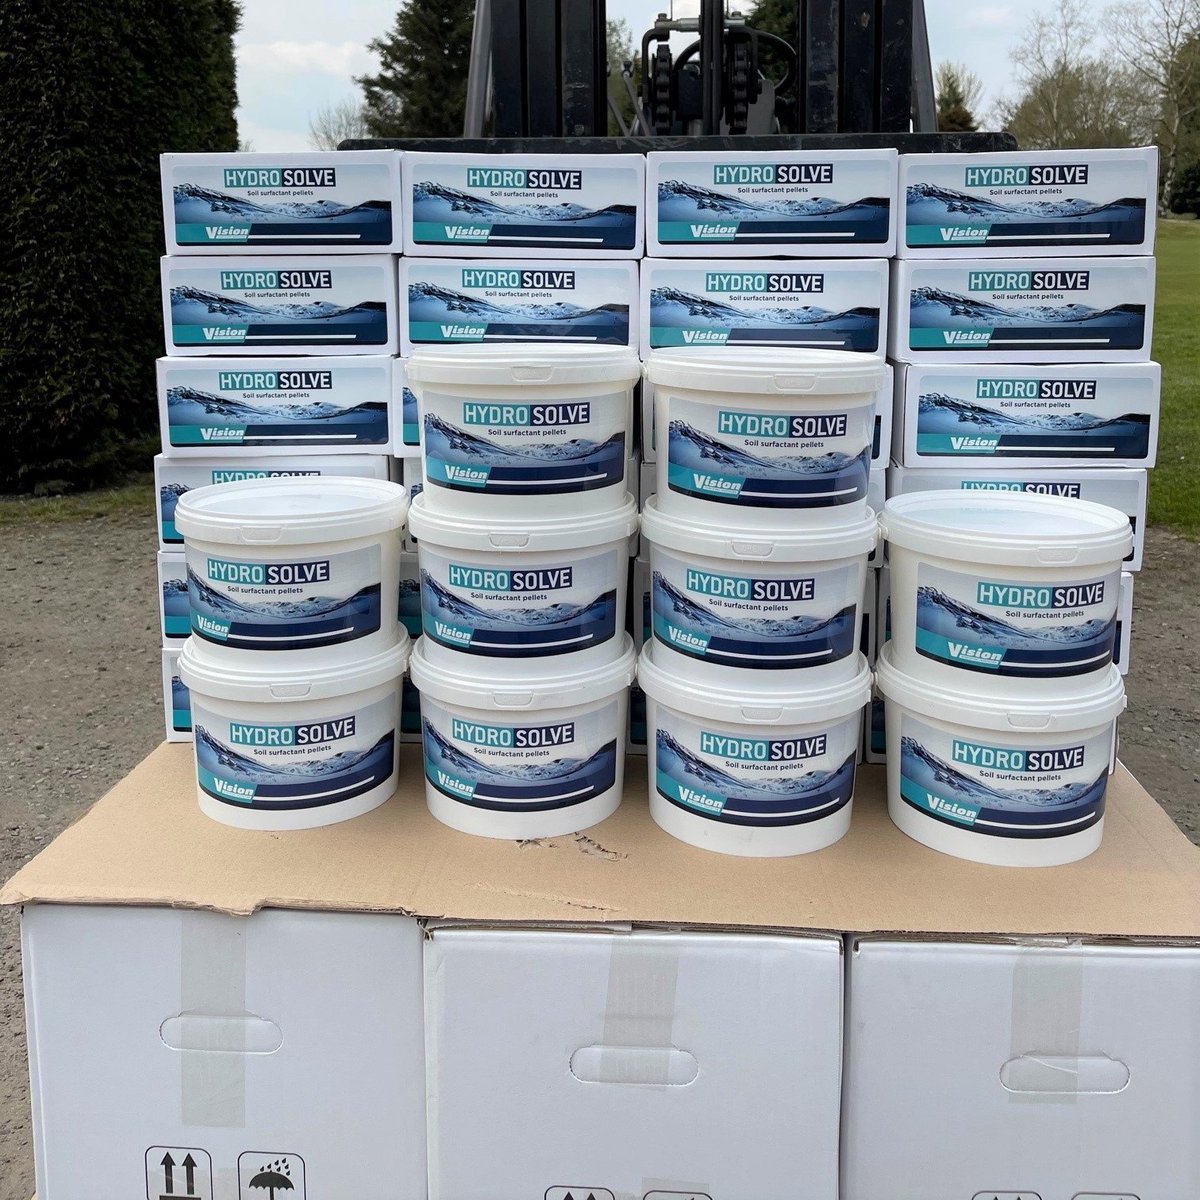 Fresh delivery today of Hydrosolve Curative Wetting Agent. Just what is needed during this dry April #aitkens #hydrosolve #greenkeeping #visionrange #wettingagent #notyouraveragewetter